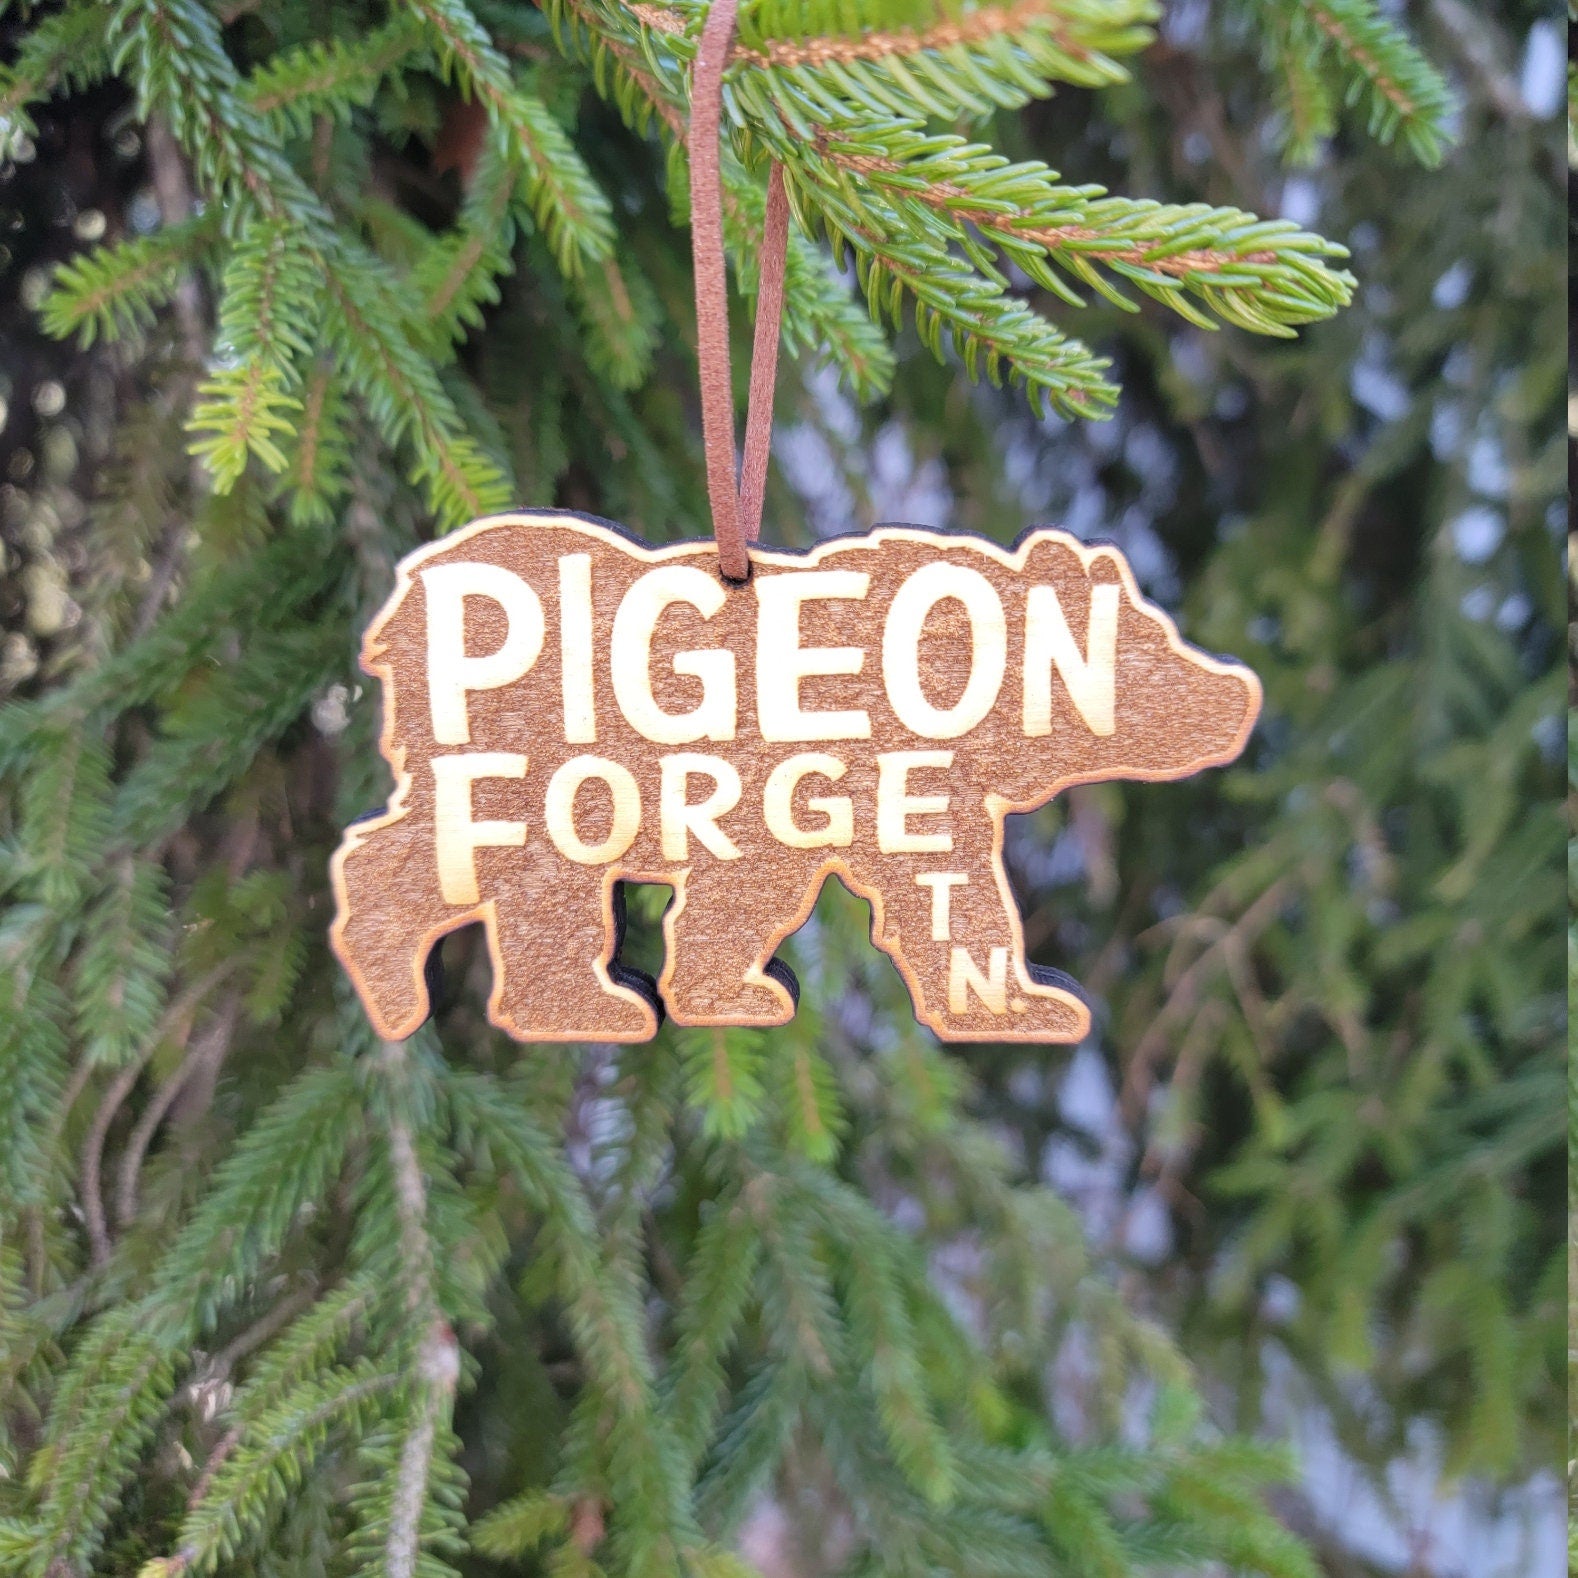 Wood Pigeon Forge Tennessee Christmas Ornament Bear Great Smoky Mountains National Park 3.8" TN